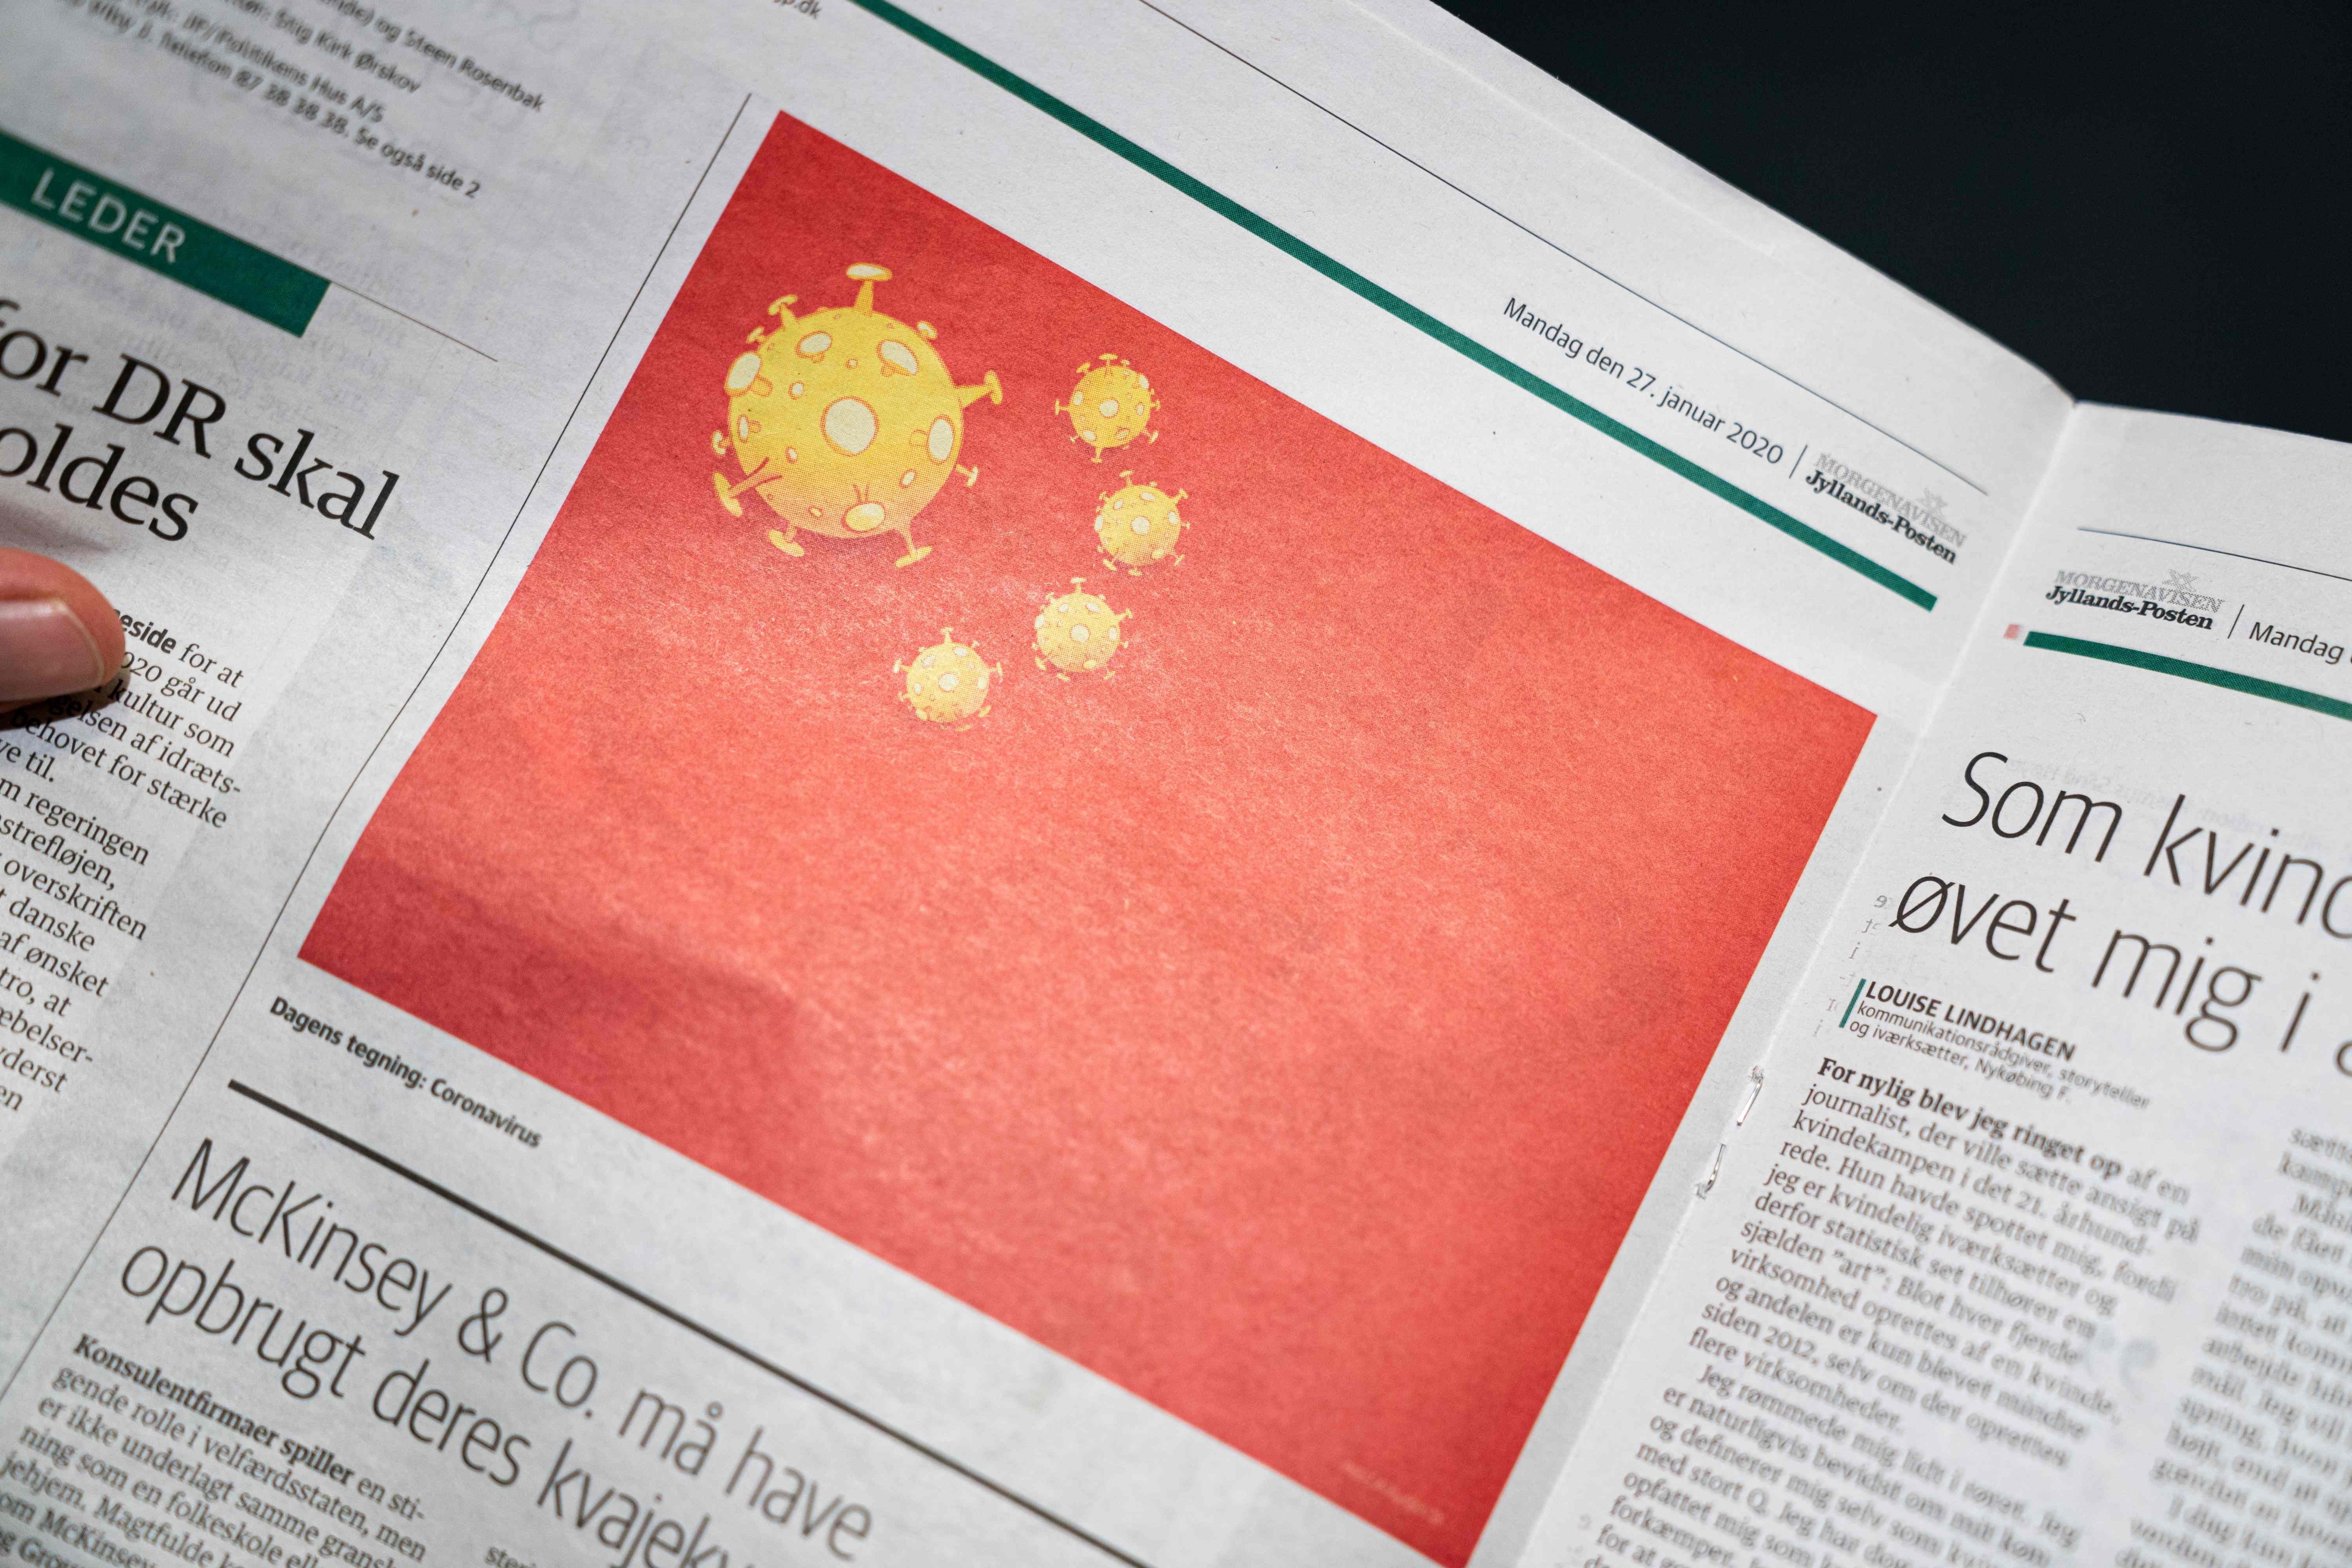 The Danish daily Jyllands-Posten has come in for criticism after it published on January 27 a satirical cartoon by Niels Bo Bojesen, who replaced the stars on the Chinese flag with the coronavirus. Photo: AFP